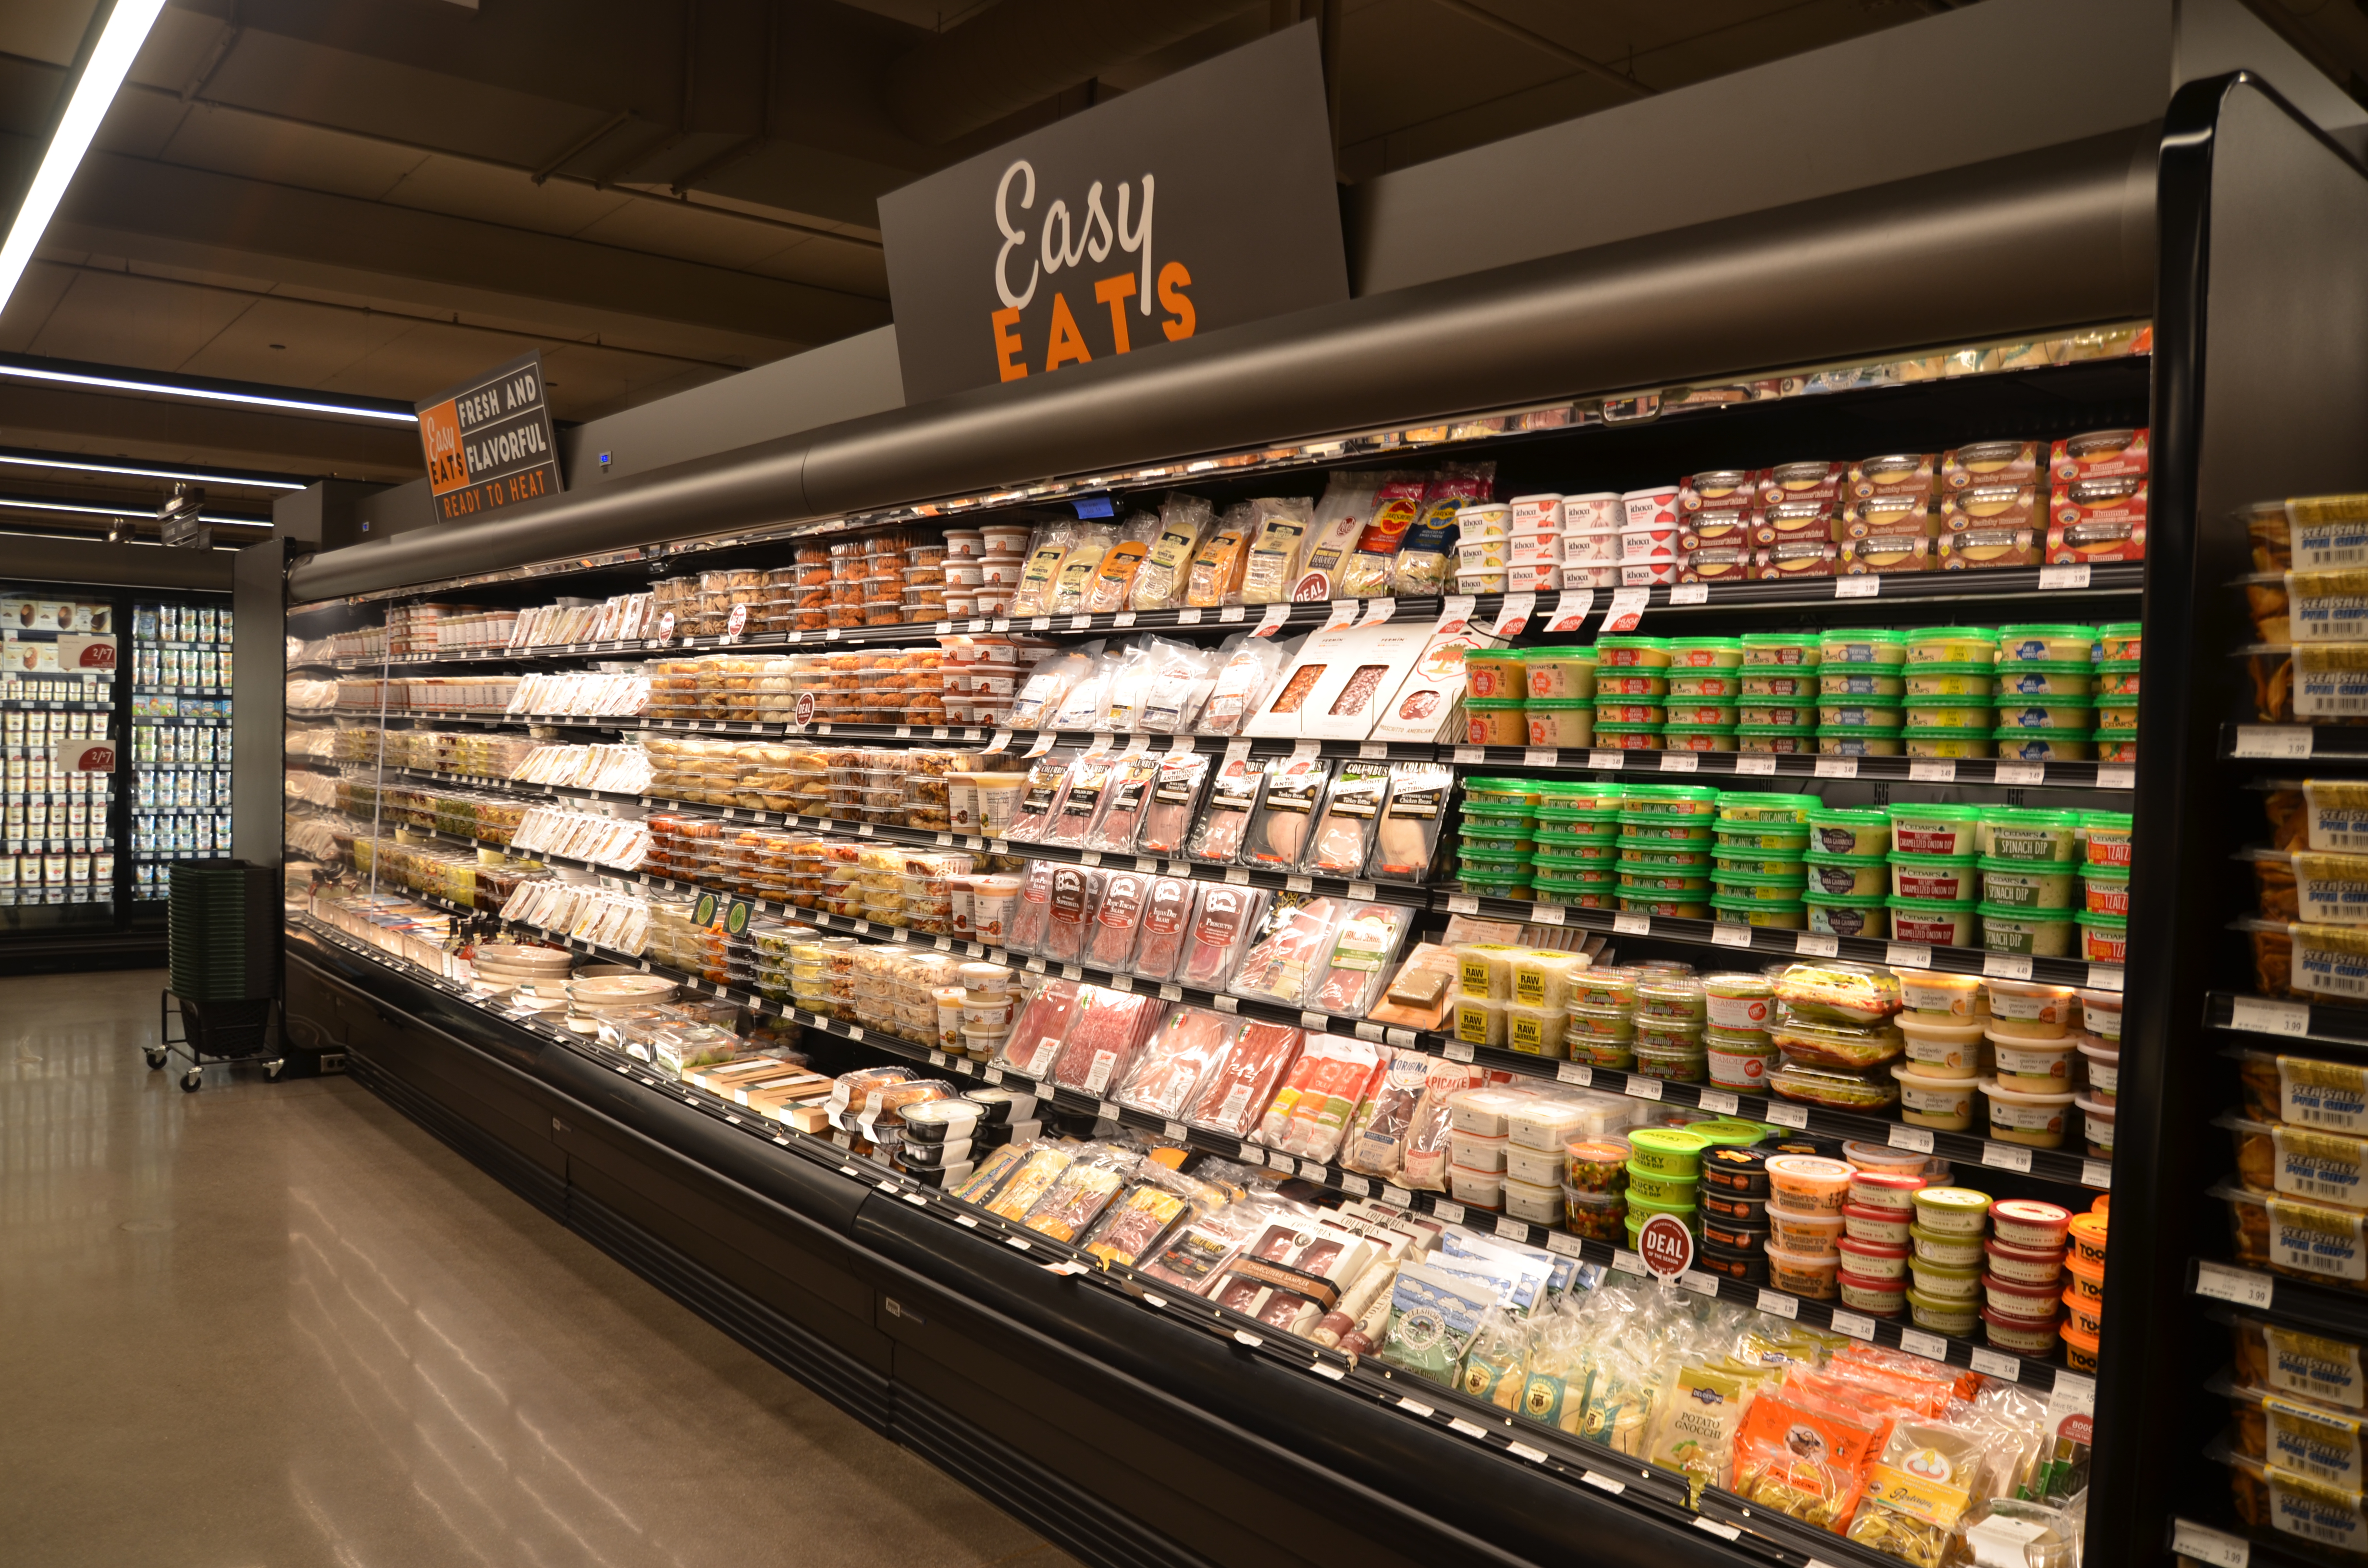 An easy eats section with hummus, pre-portioned food, and packaged meats.